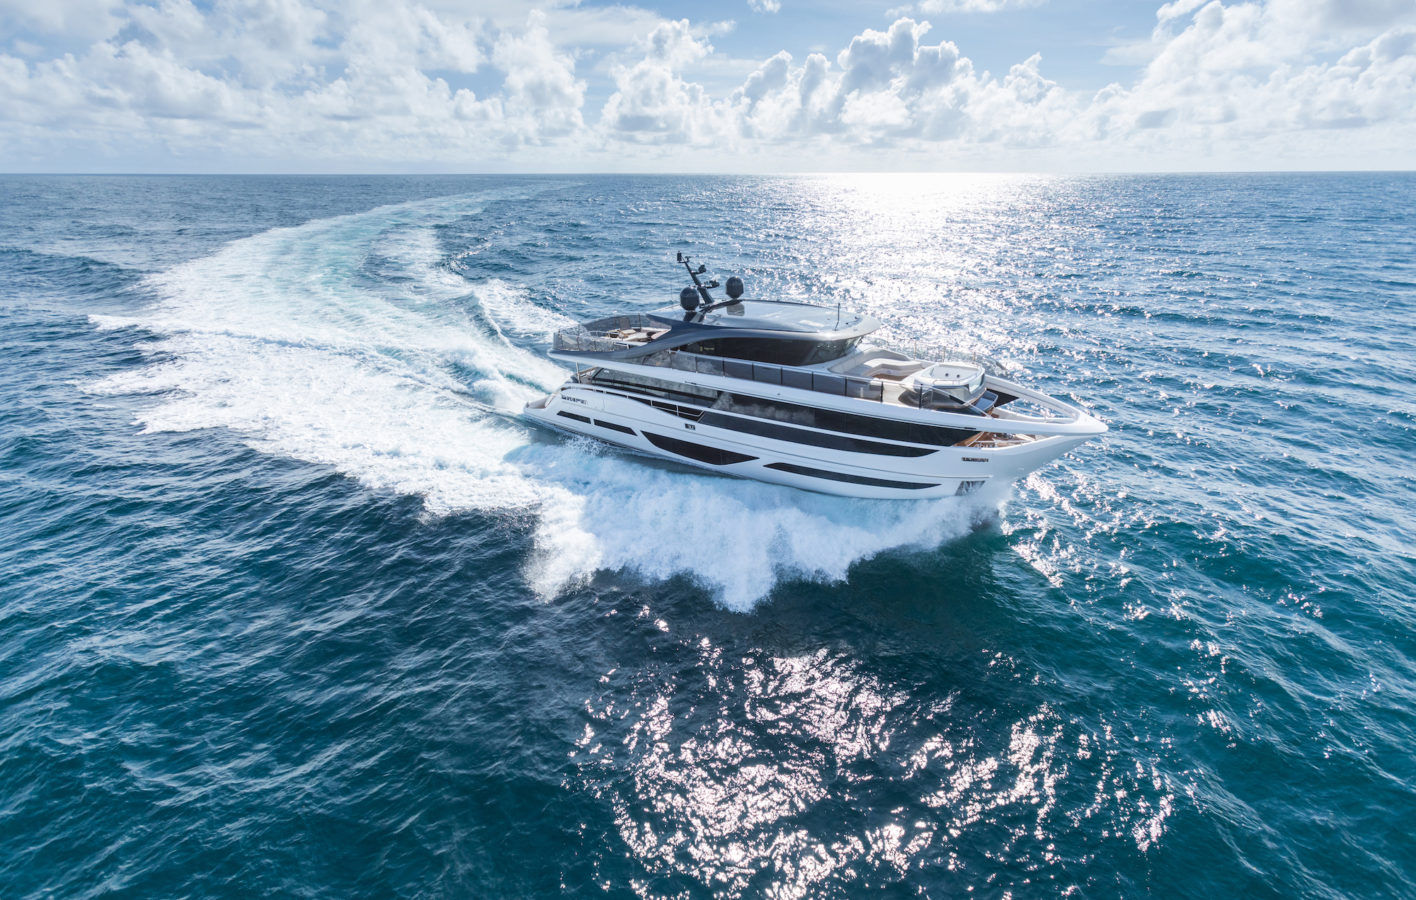 Ta-daa… The All-New Princess X95 Superyacht Has Arrived in Thailand